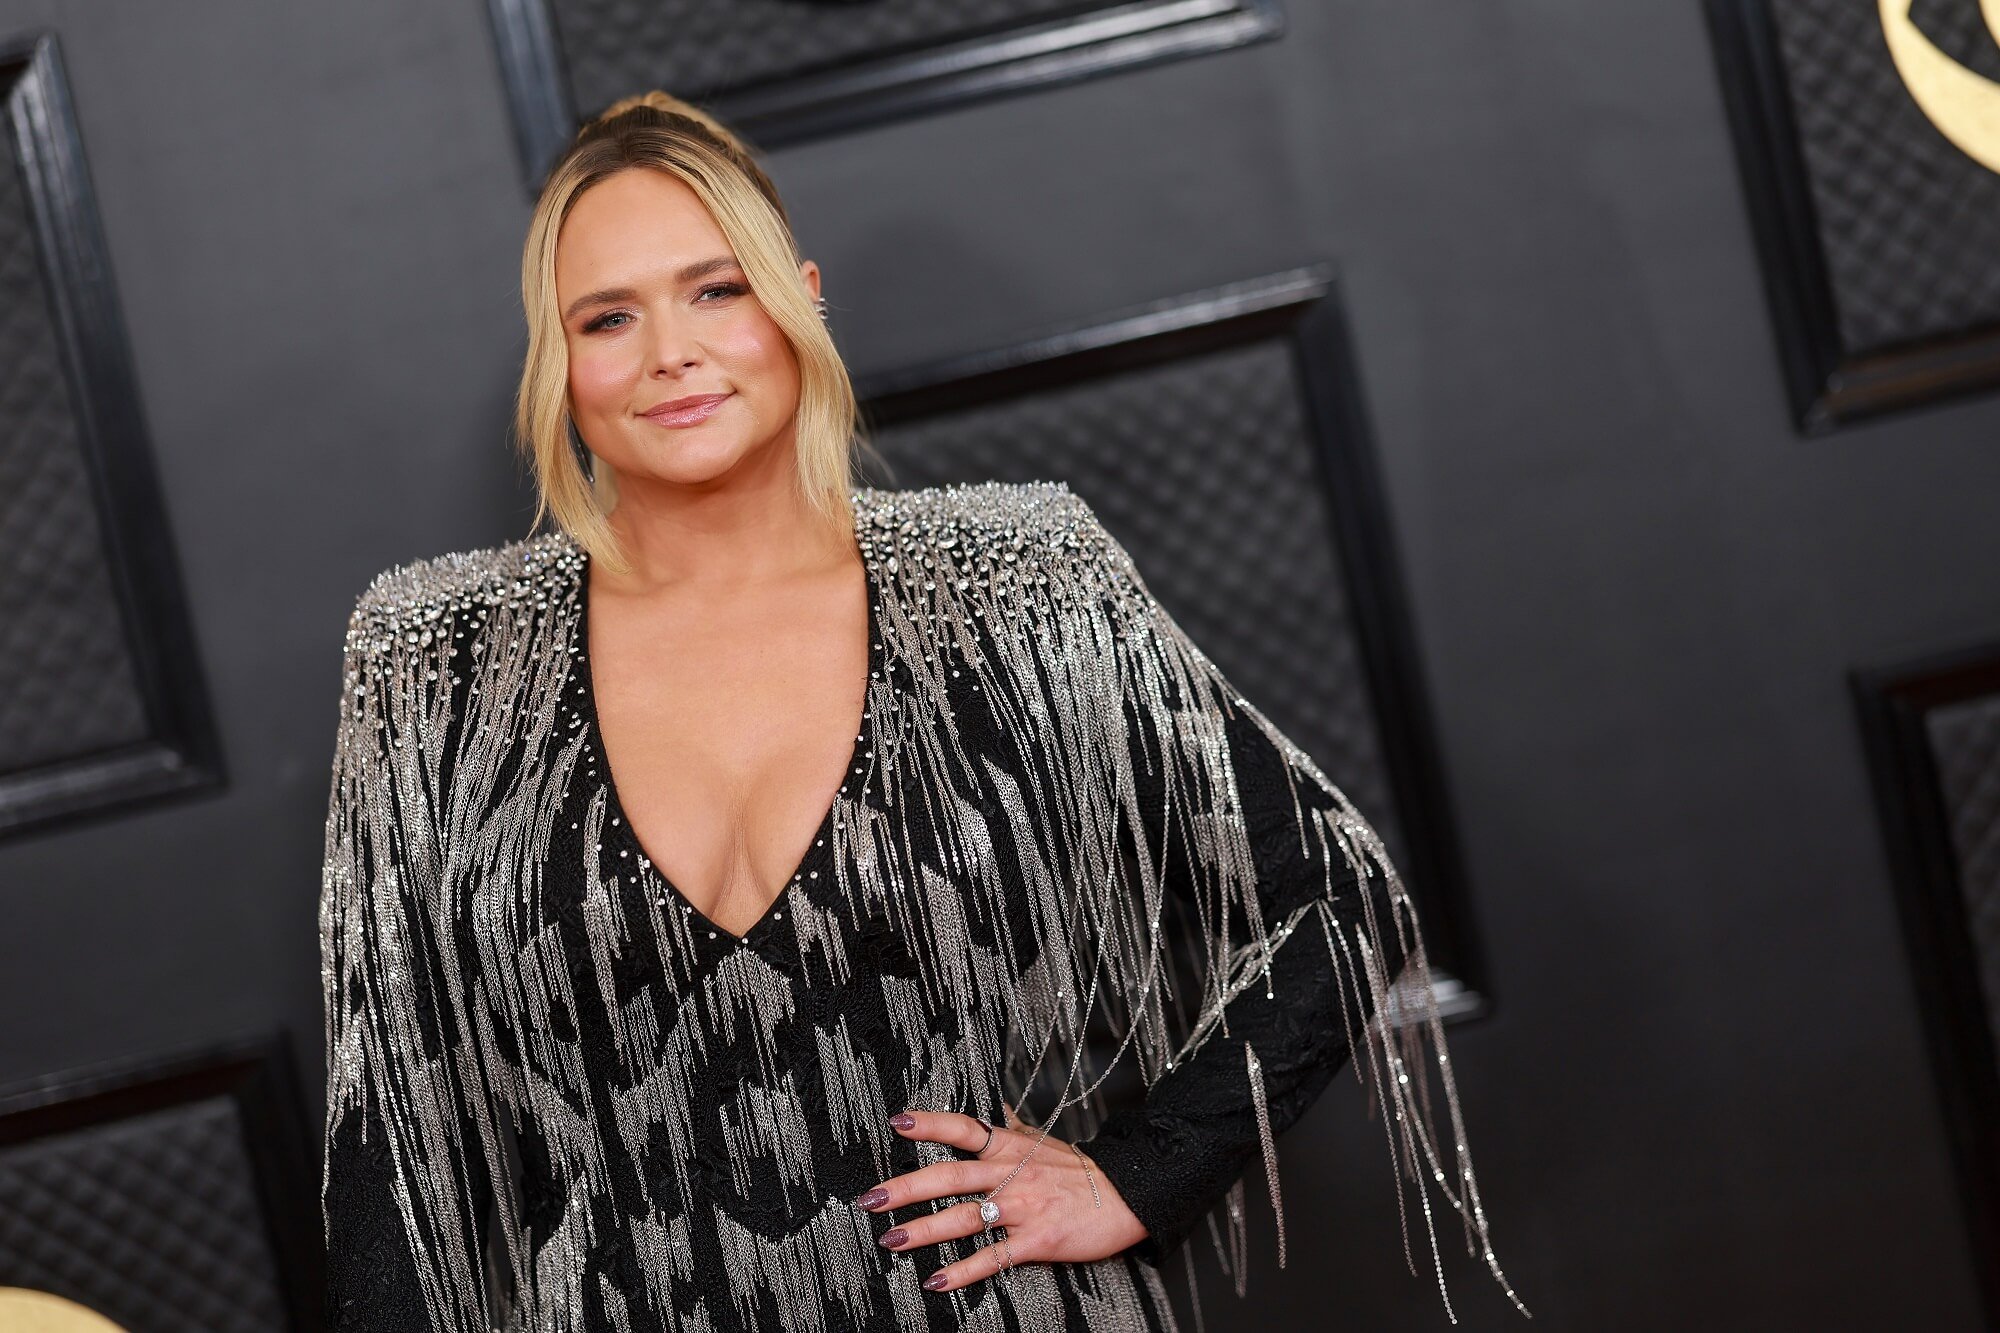 Miranda Lambert stands with her hand on her hip in front of a black wall